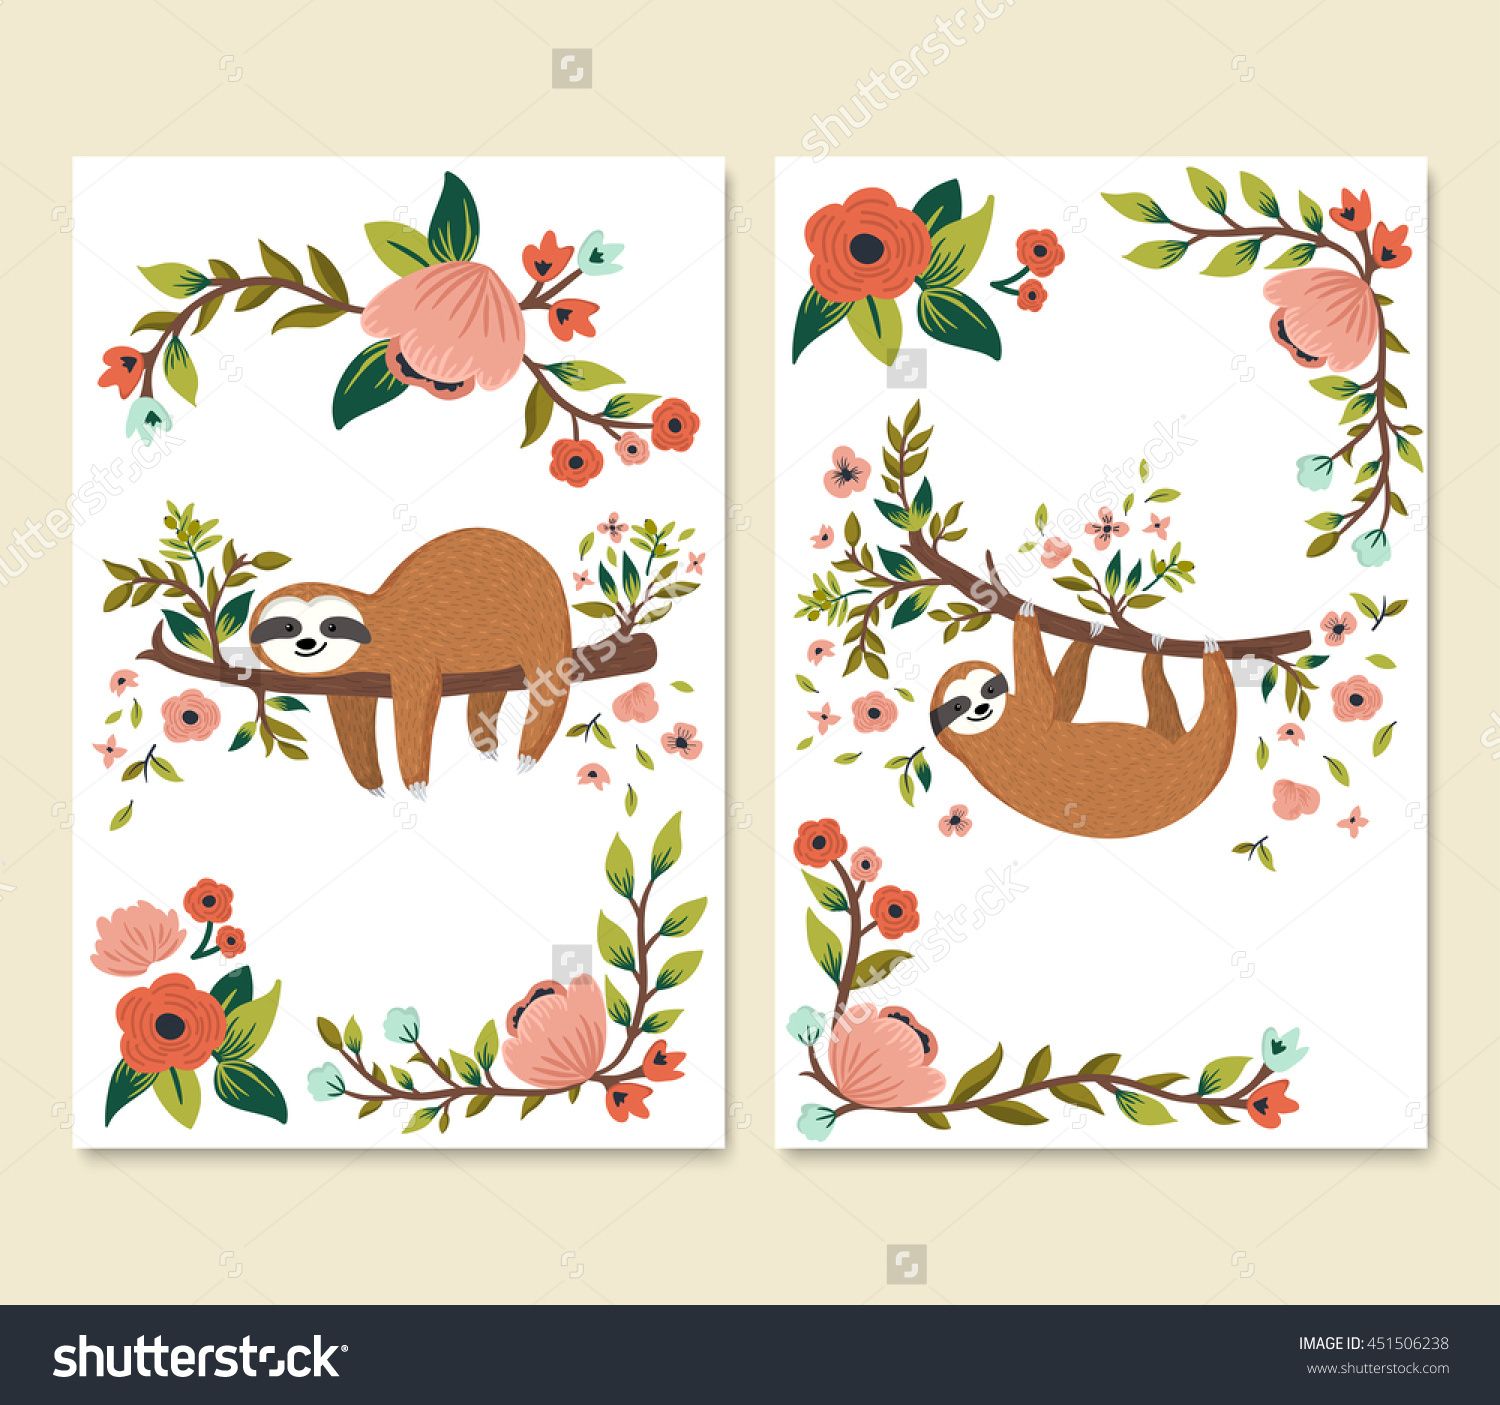 sloth clipart free flower